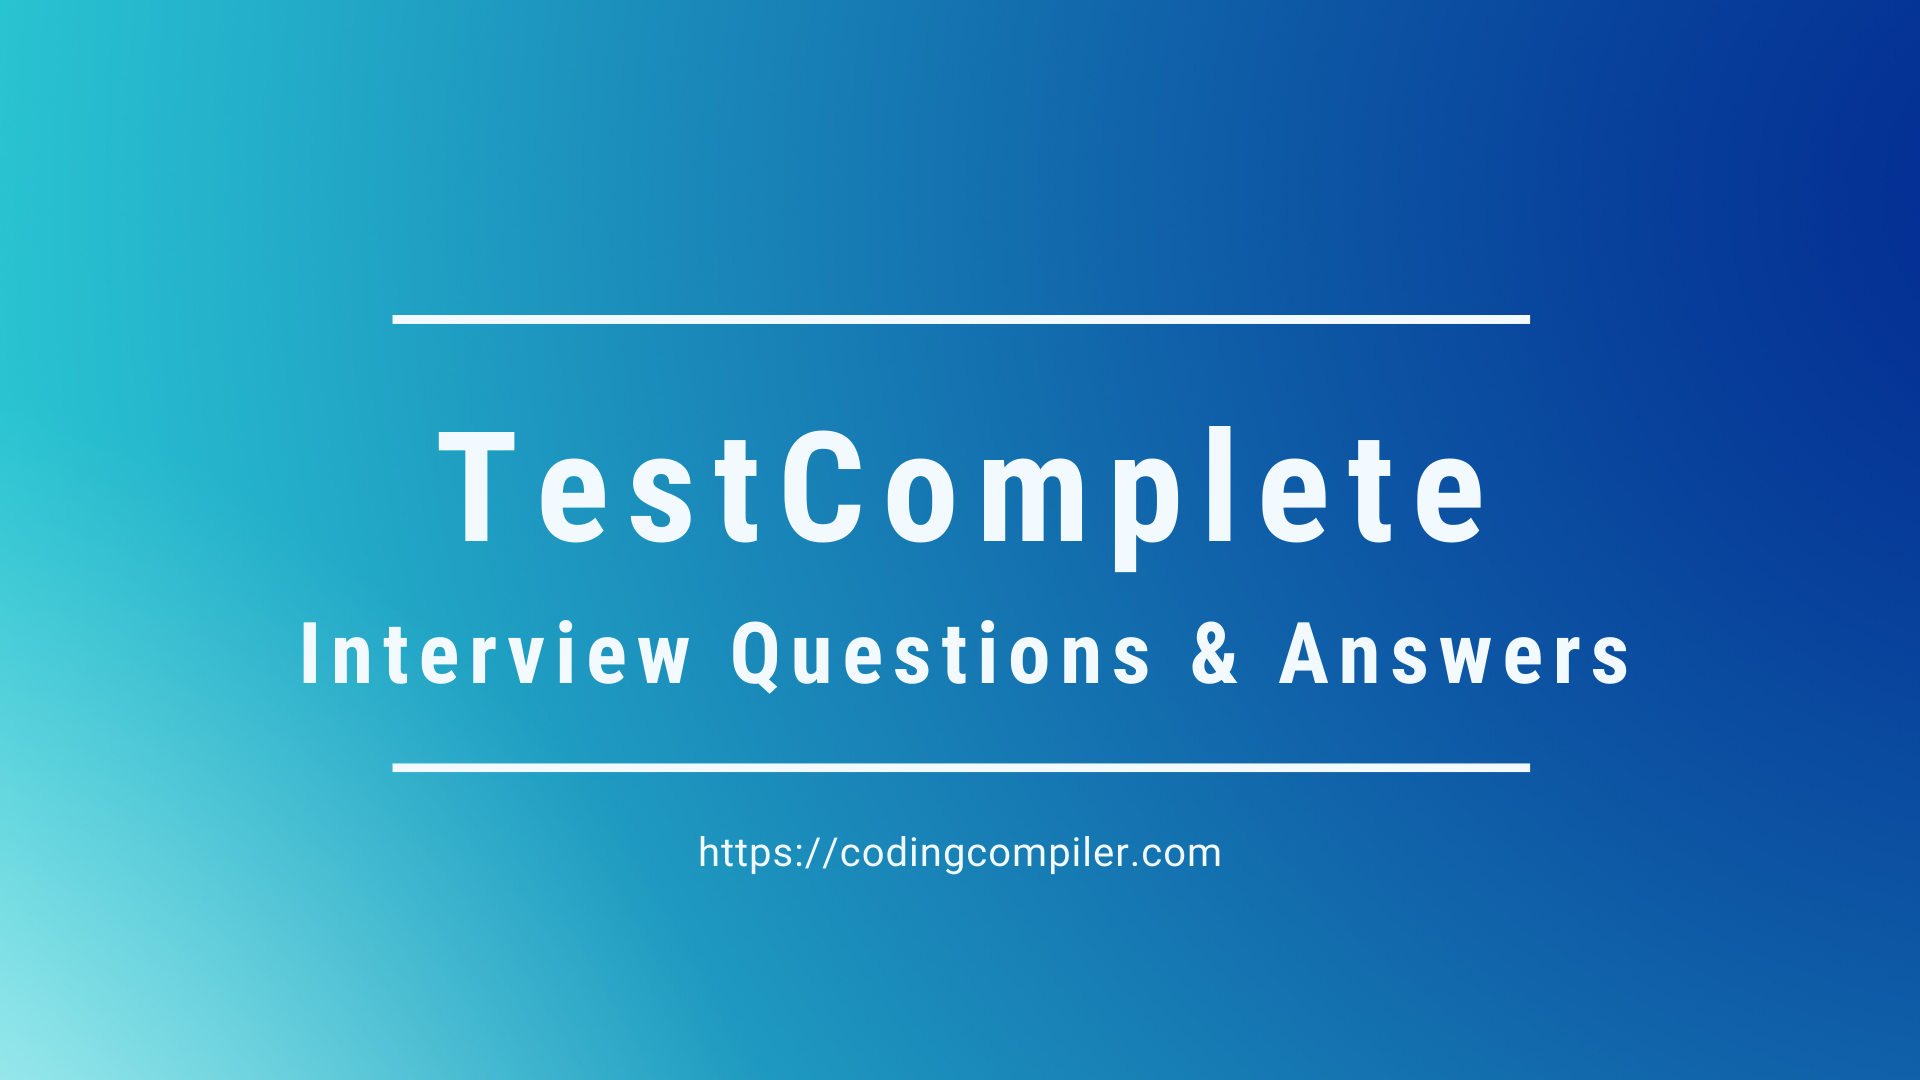 TestComplete Interview Questions